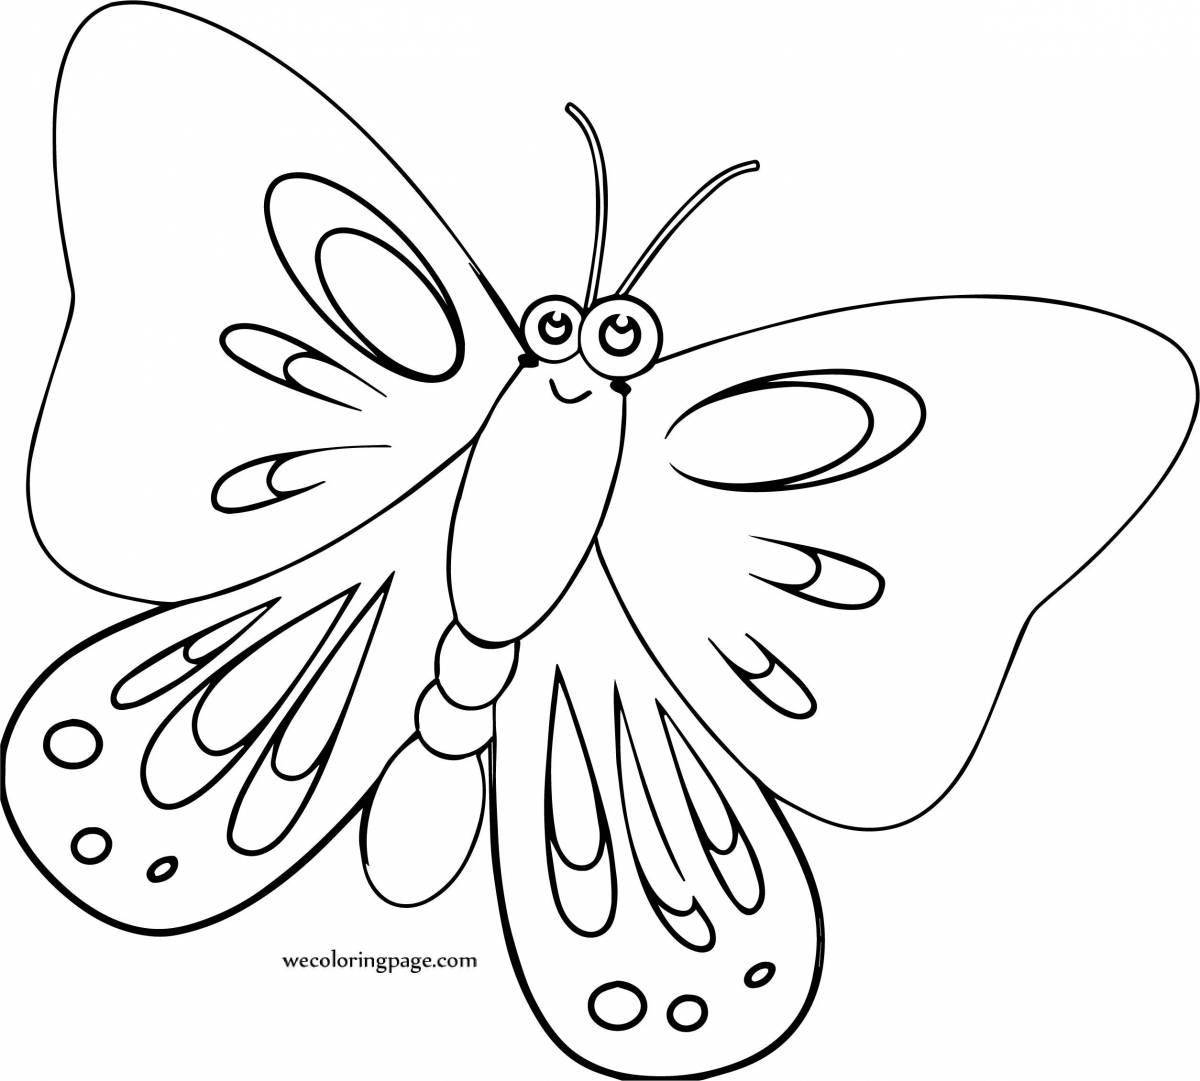 Apollo butterfly shining coloring book